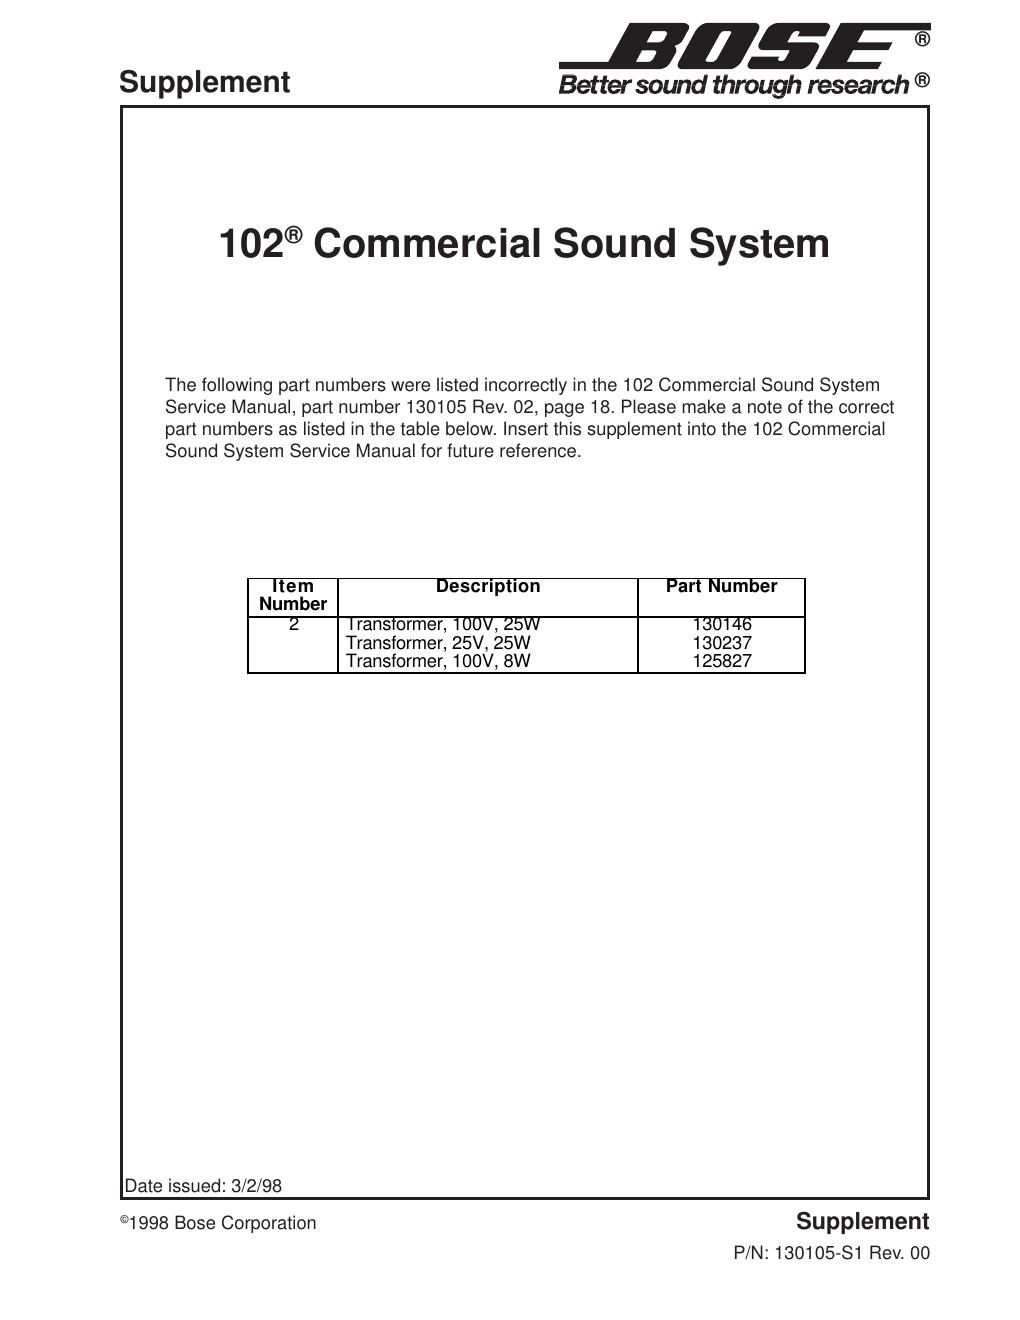 bose 102 commercial sound system supplement